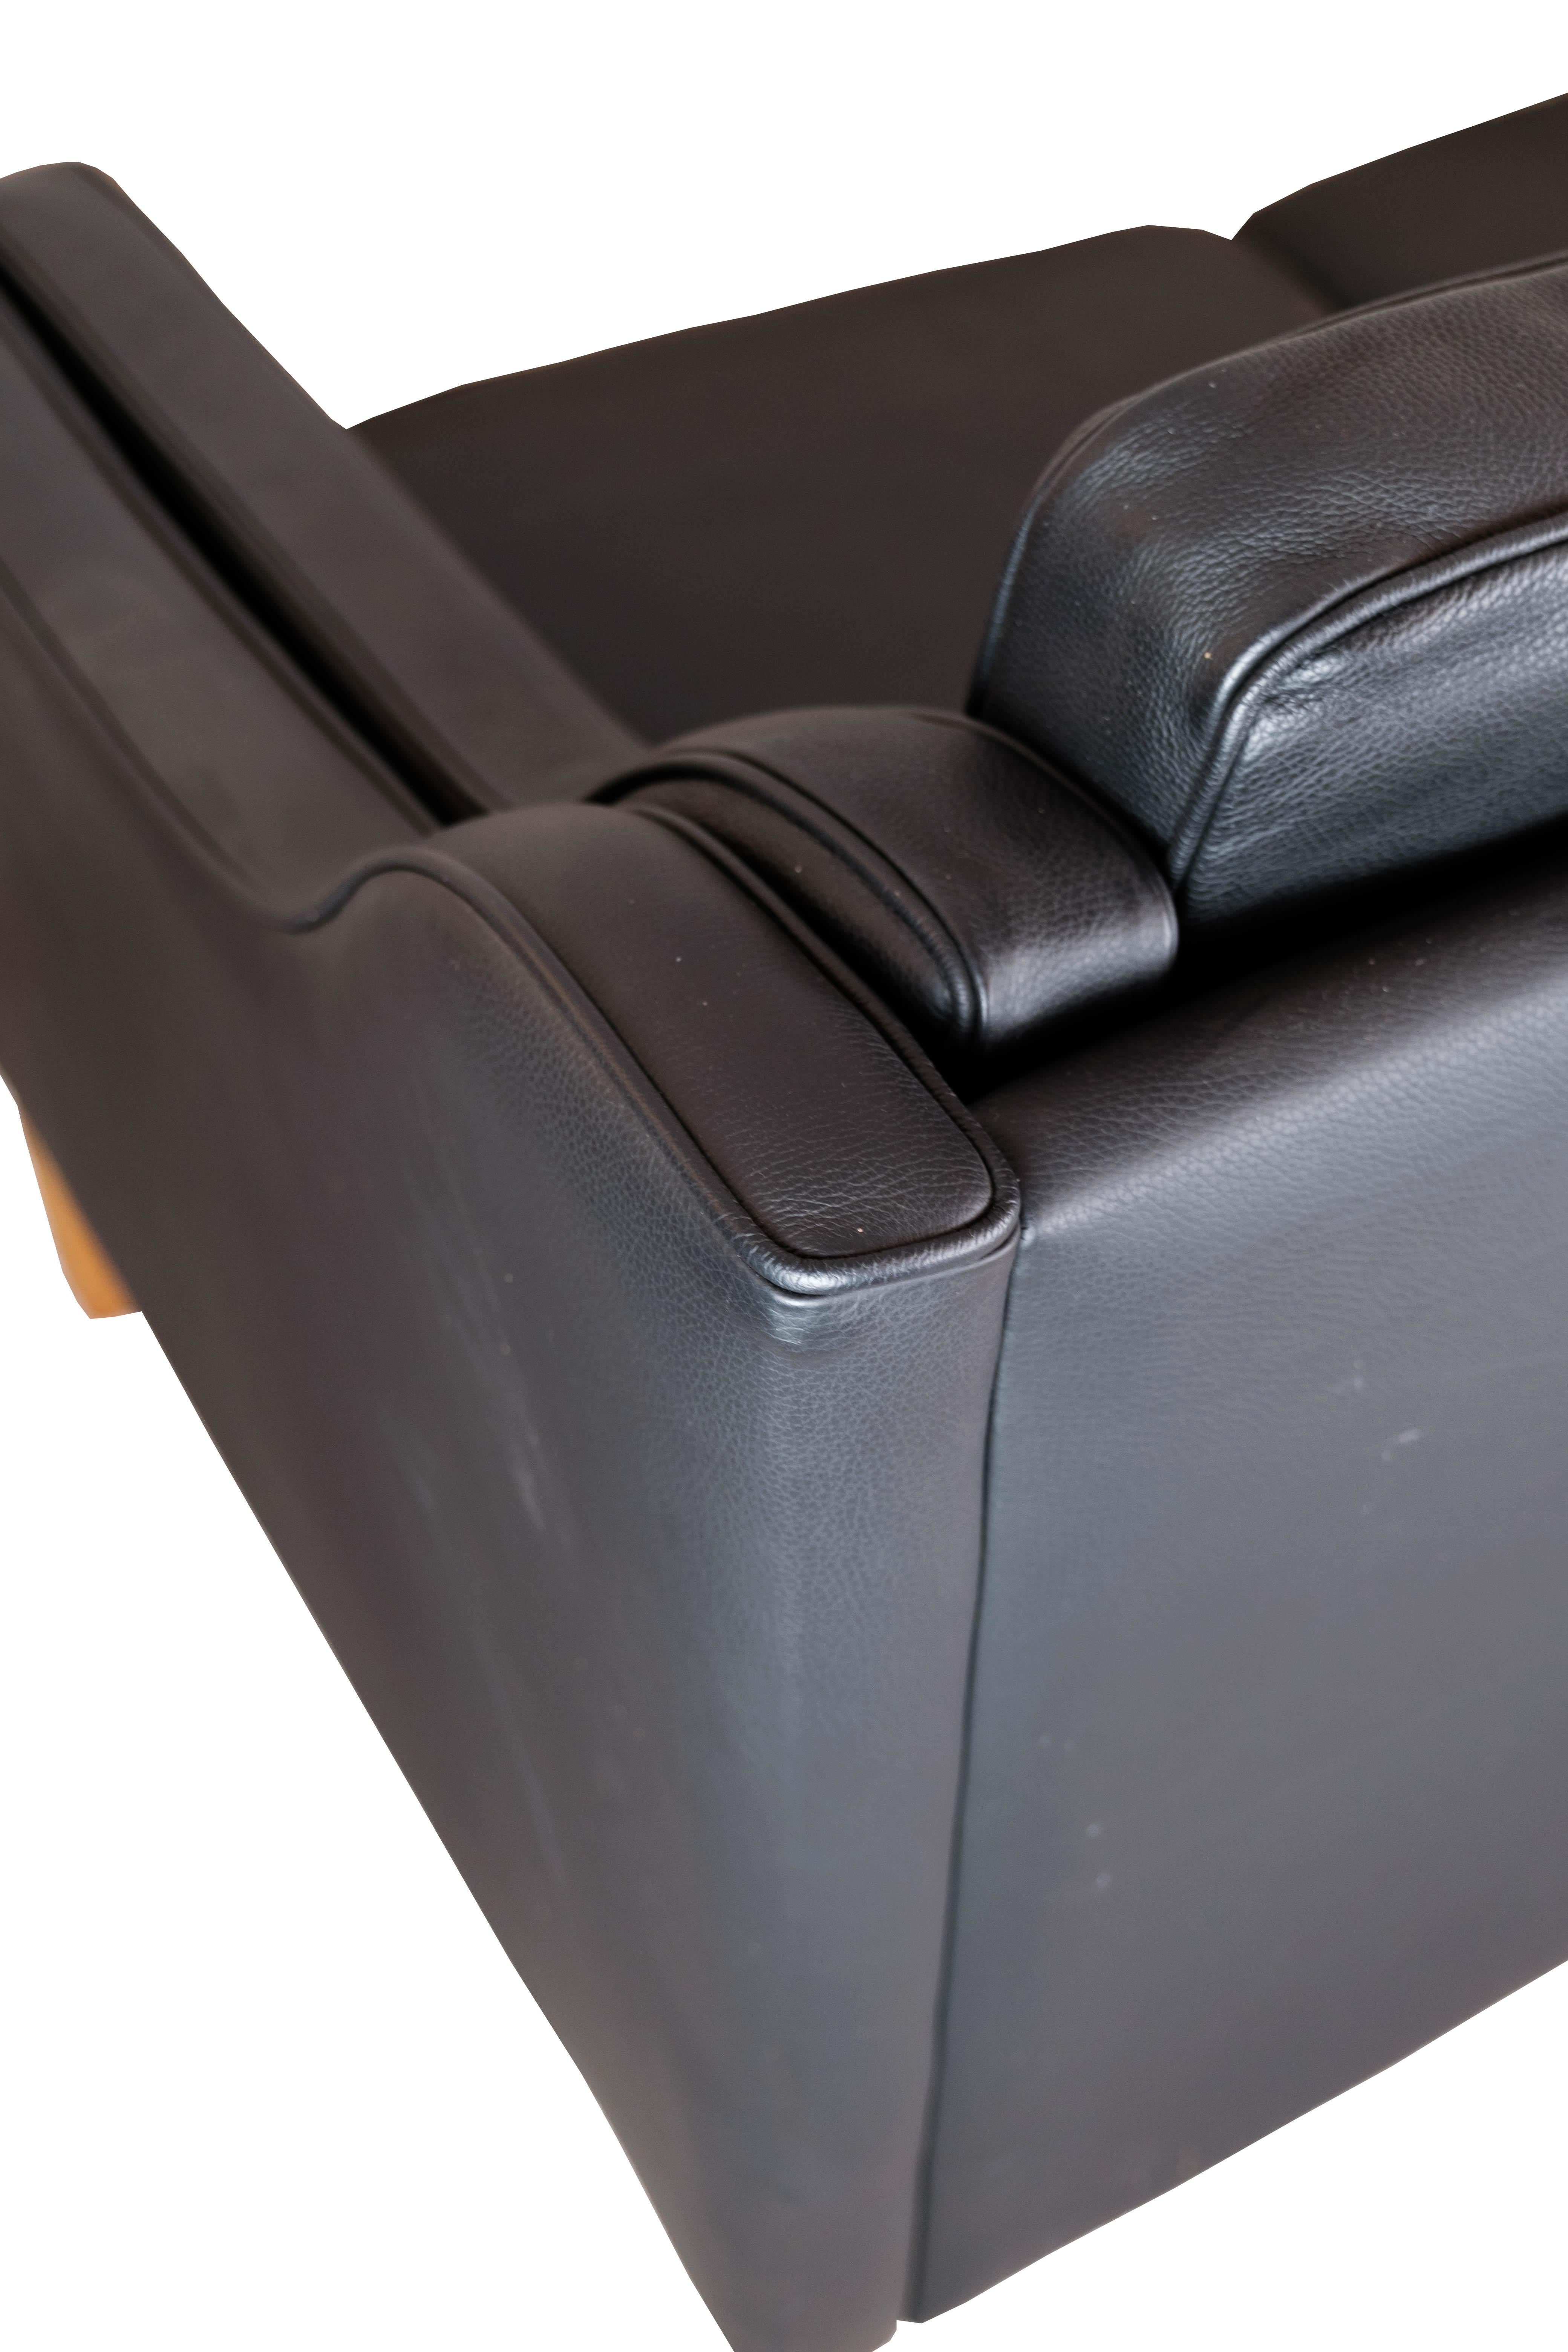 Black Leather 2 Seater Sofa with Legs of Oak, Manufactured by Stouby Furniture 5